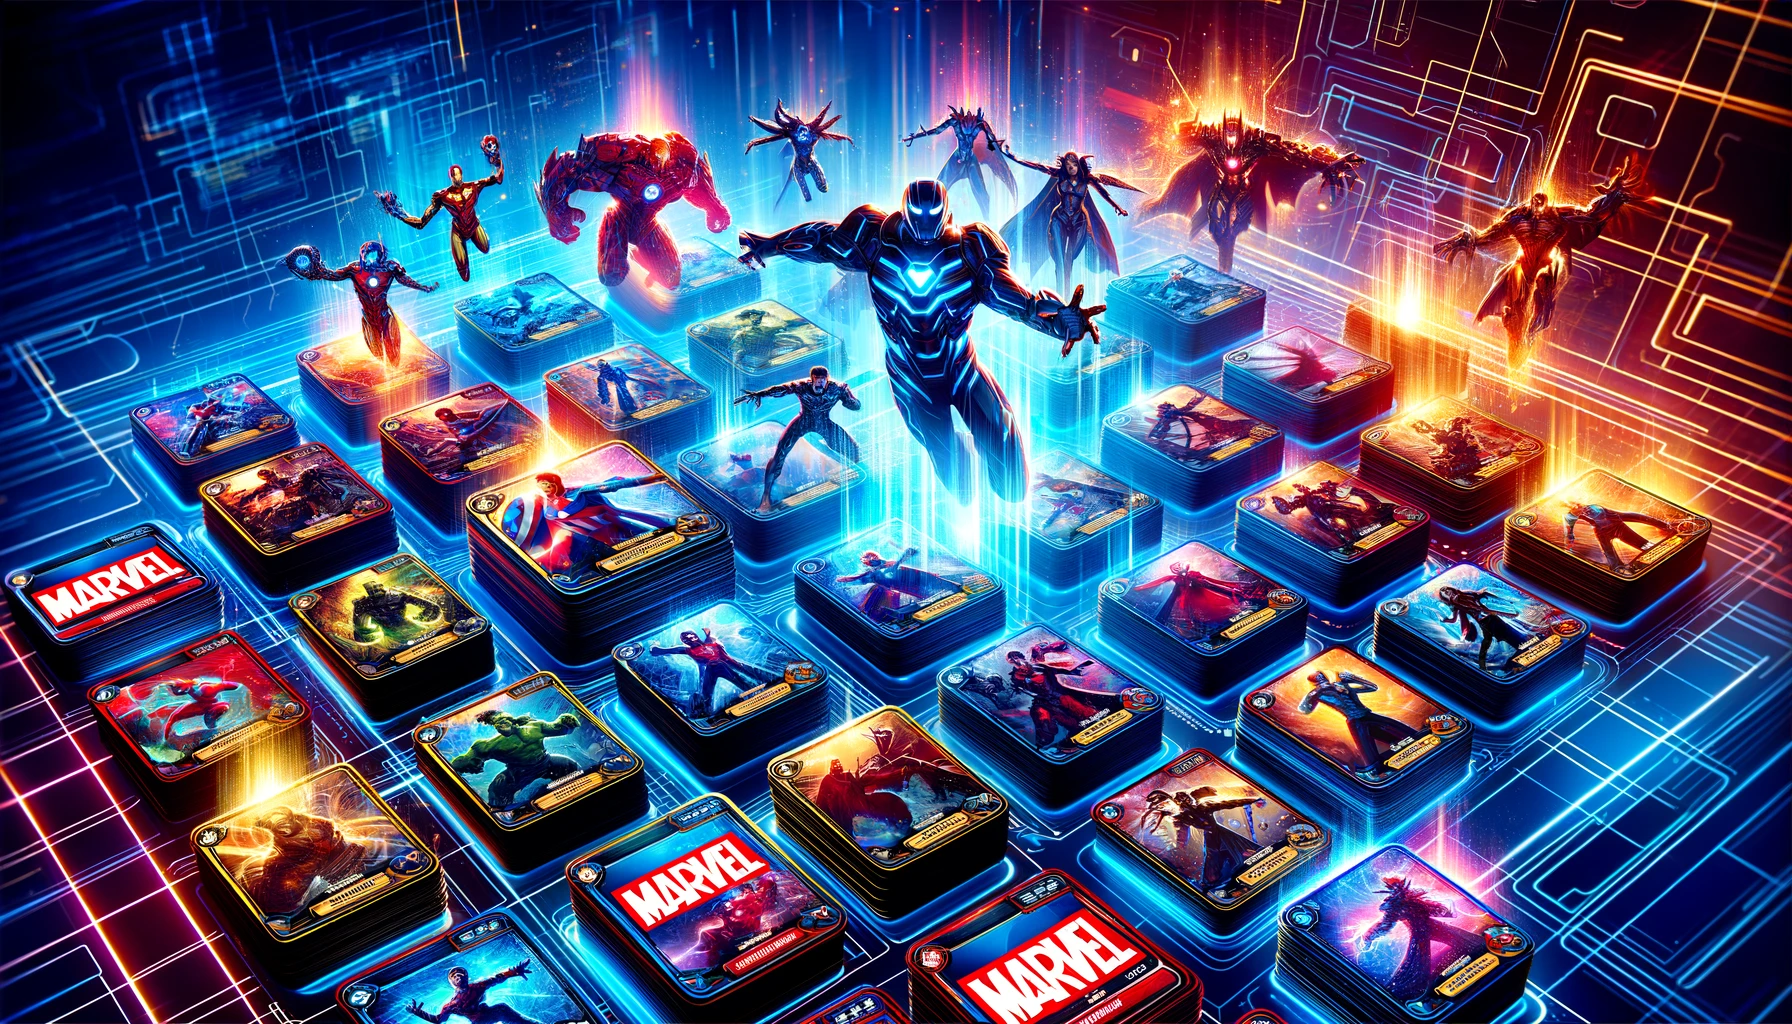 A vibrant depiction of the Marvel Snap card game with iconic heroes and villains on glowing cards in strategic deck formations.